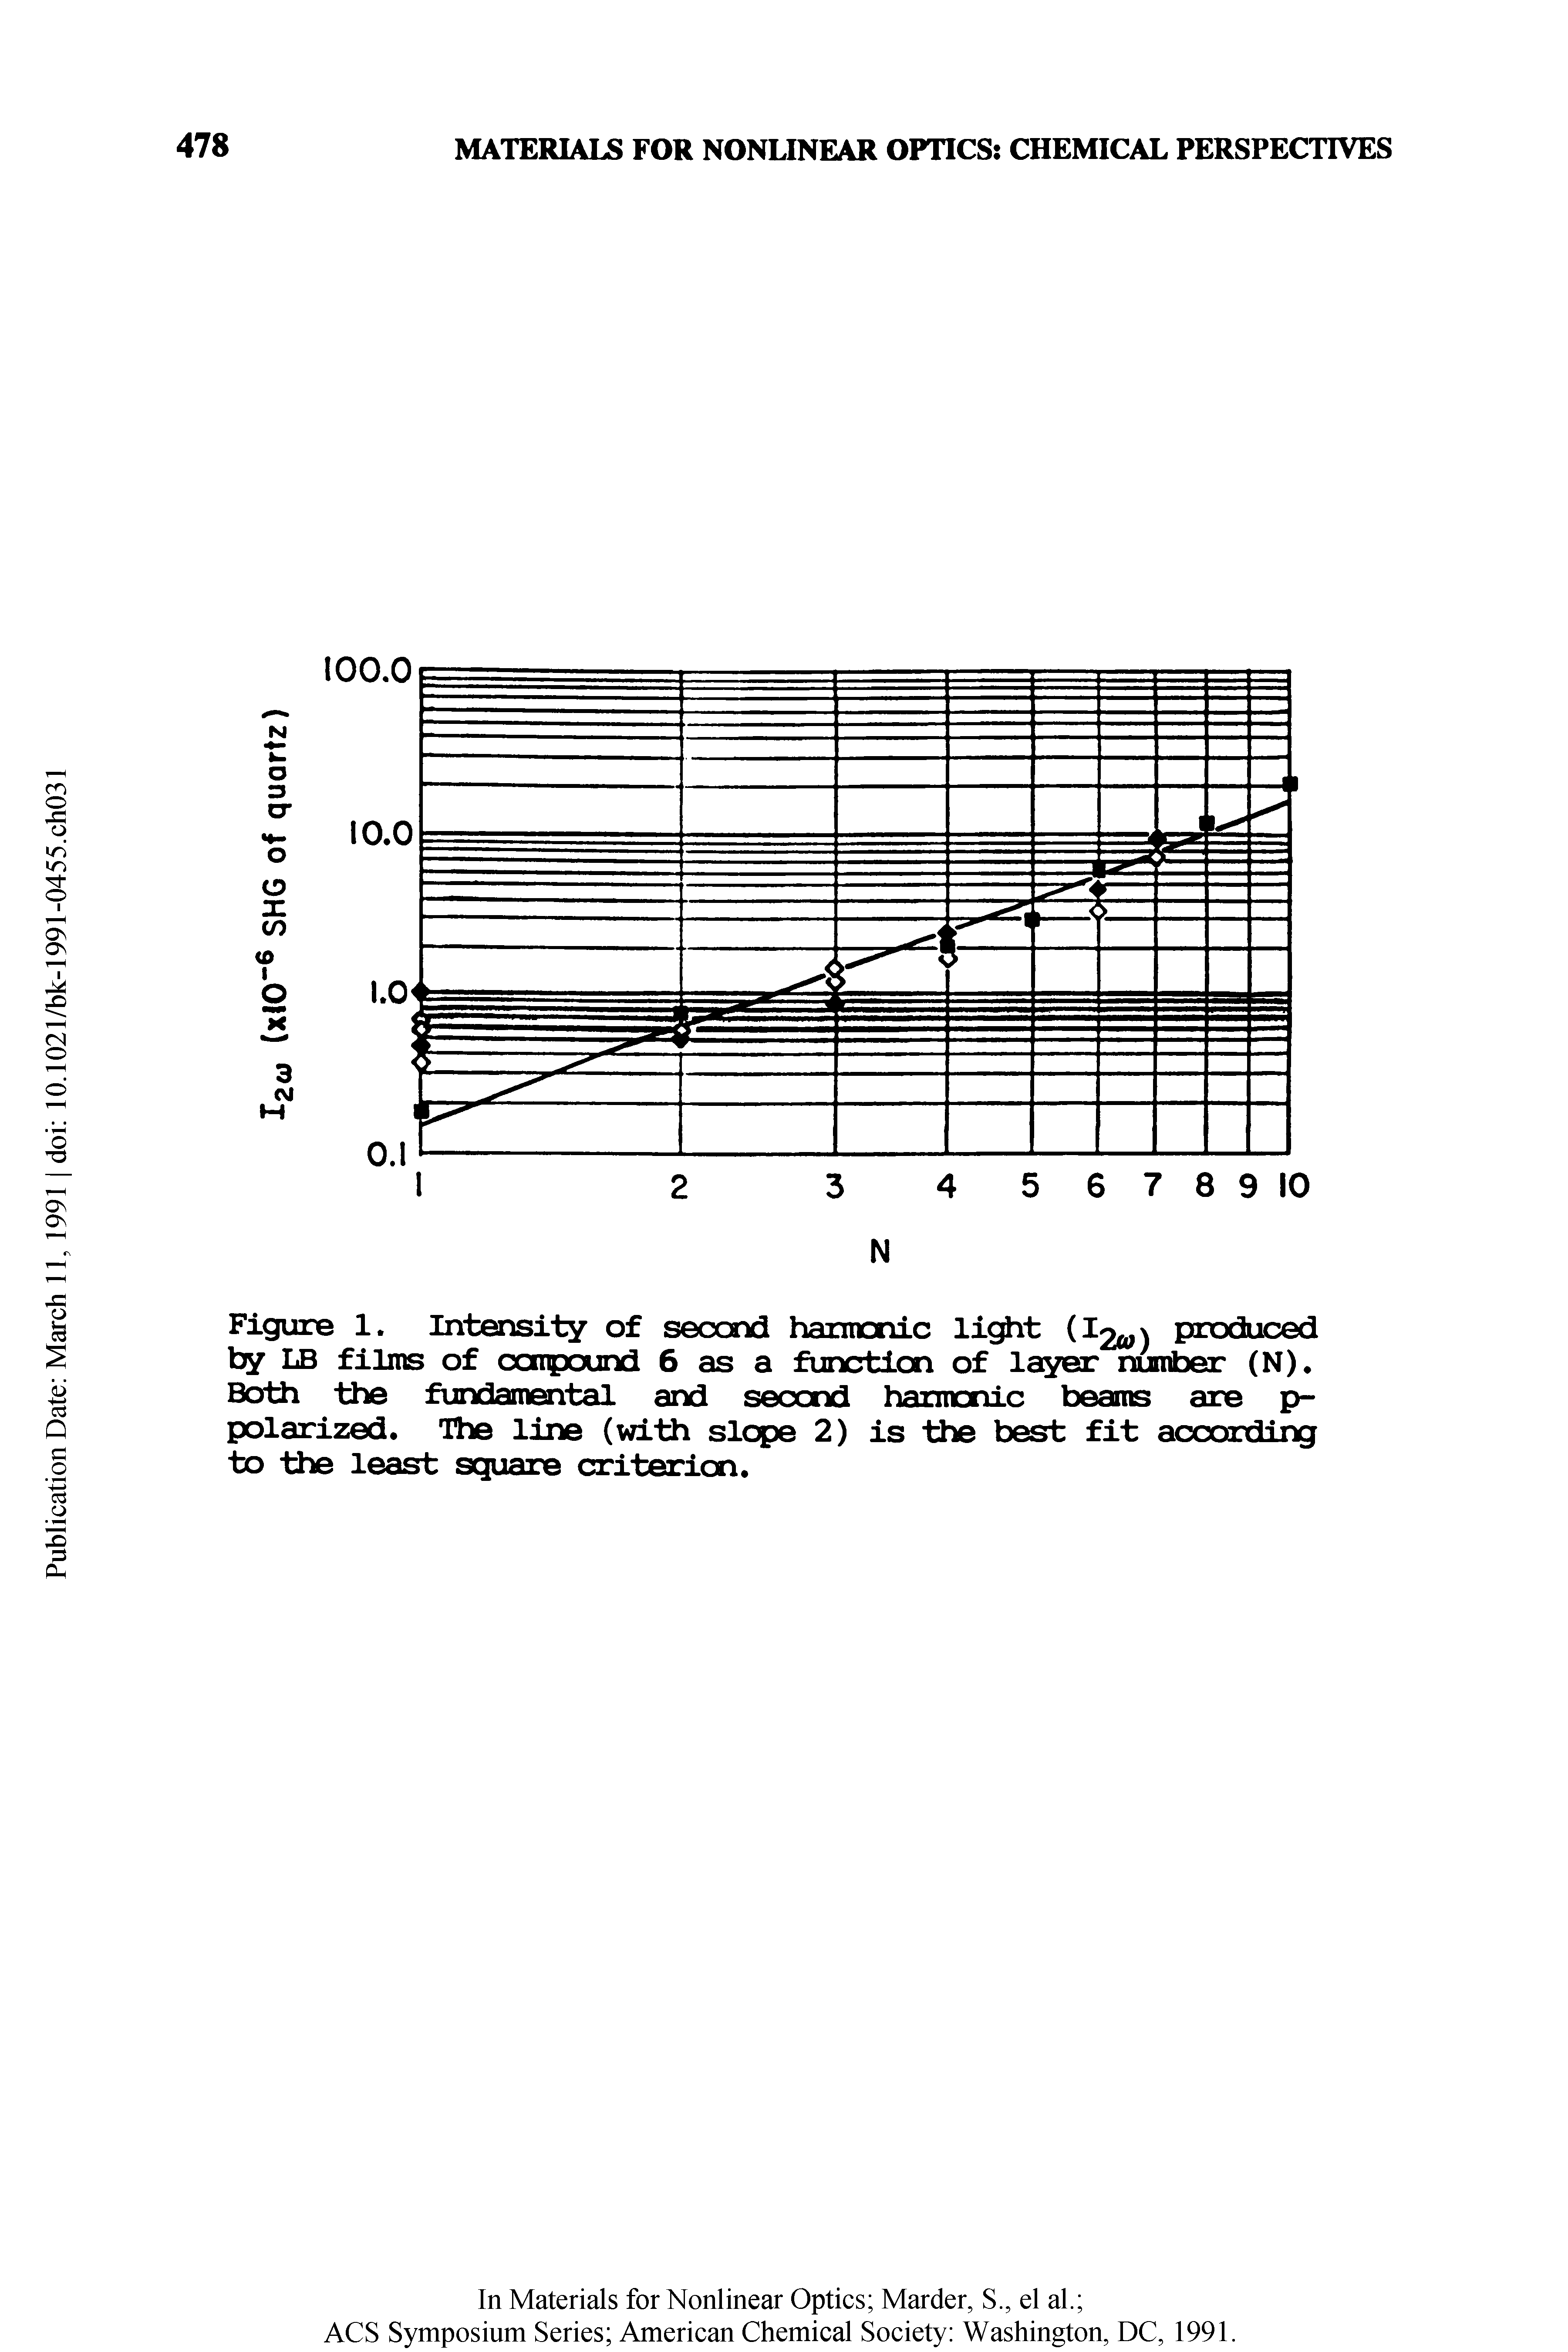 Figure 1. Intensity of second harmonic light (I ) produced by LB films of compound 6 as a function of layer number (N). Both the fundamental and second harmonic beams are p-polarized. The line (with slope 2) is the best fit according to the least square criterion.